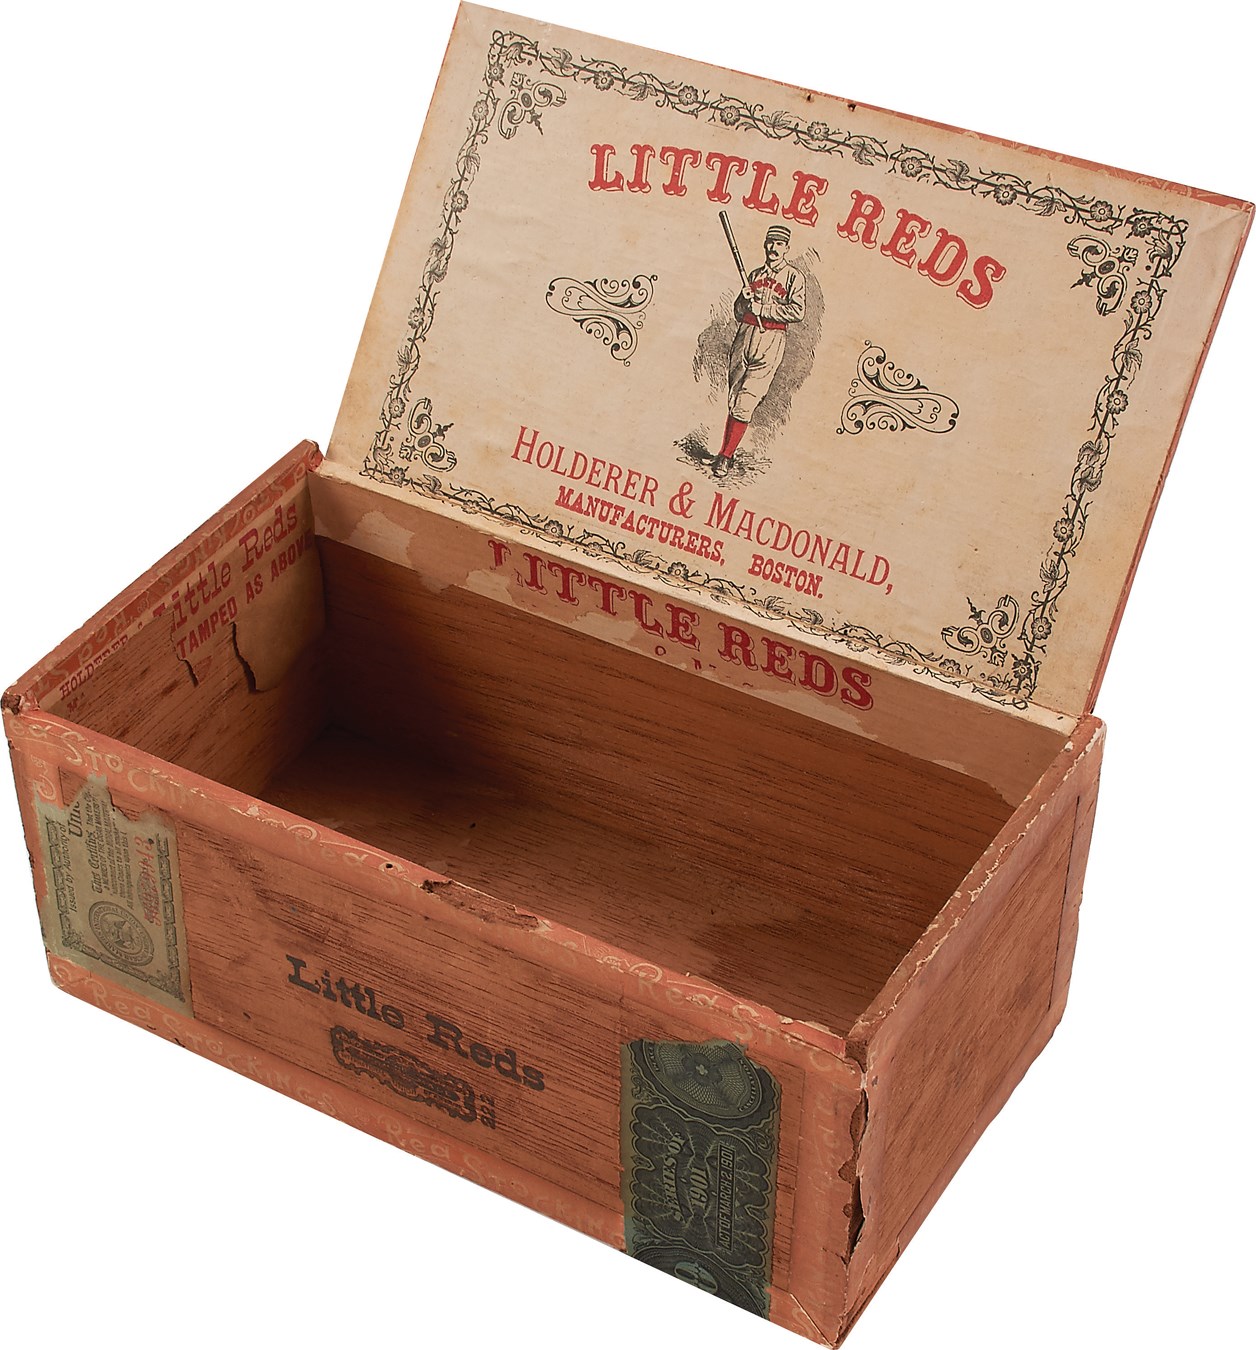 - Mike "King Kelly" Boston Red Stockings Cigar Box - Incredible New Discovery, Only One Known